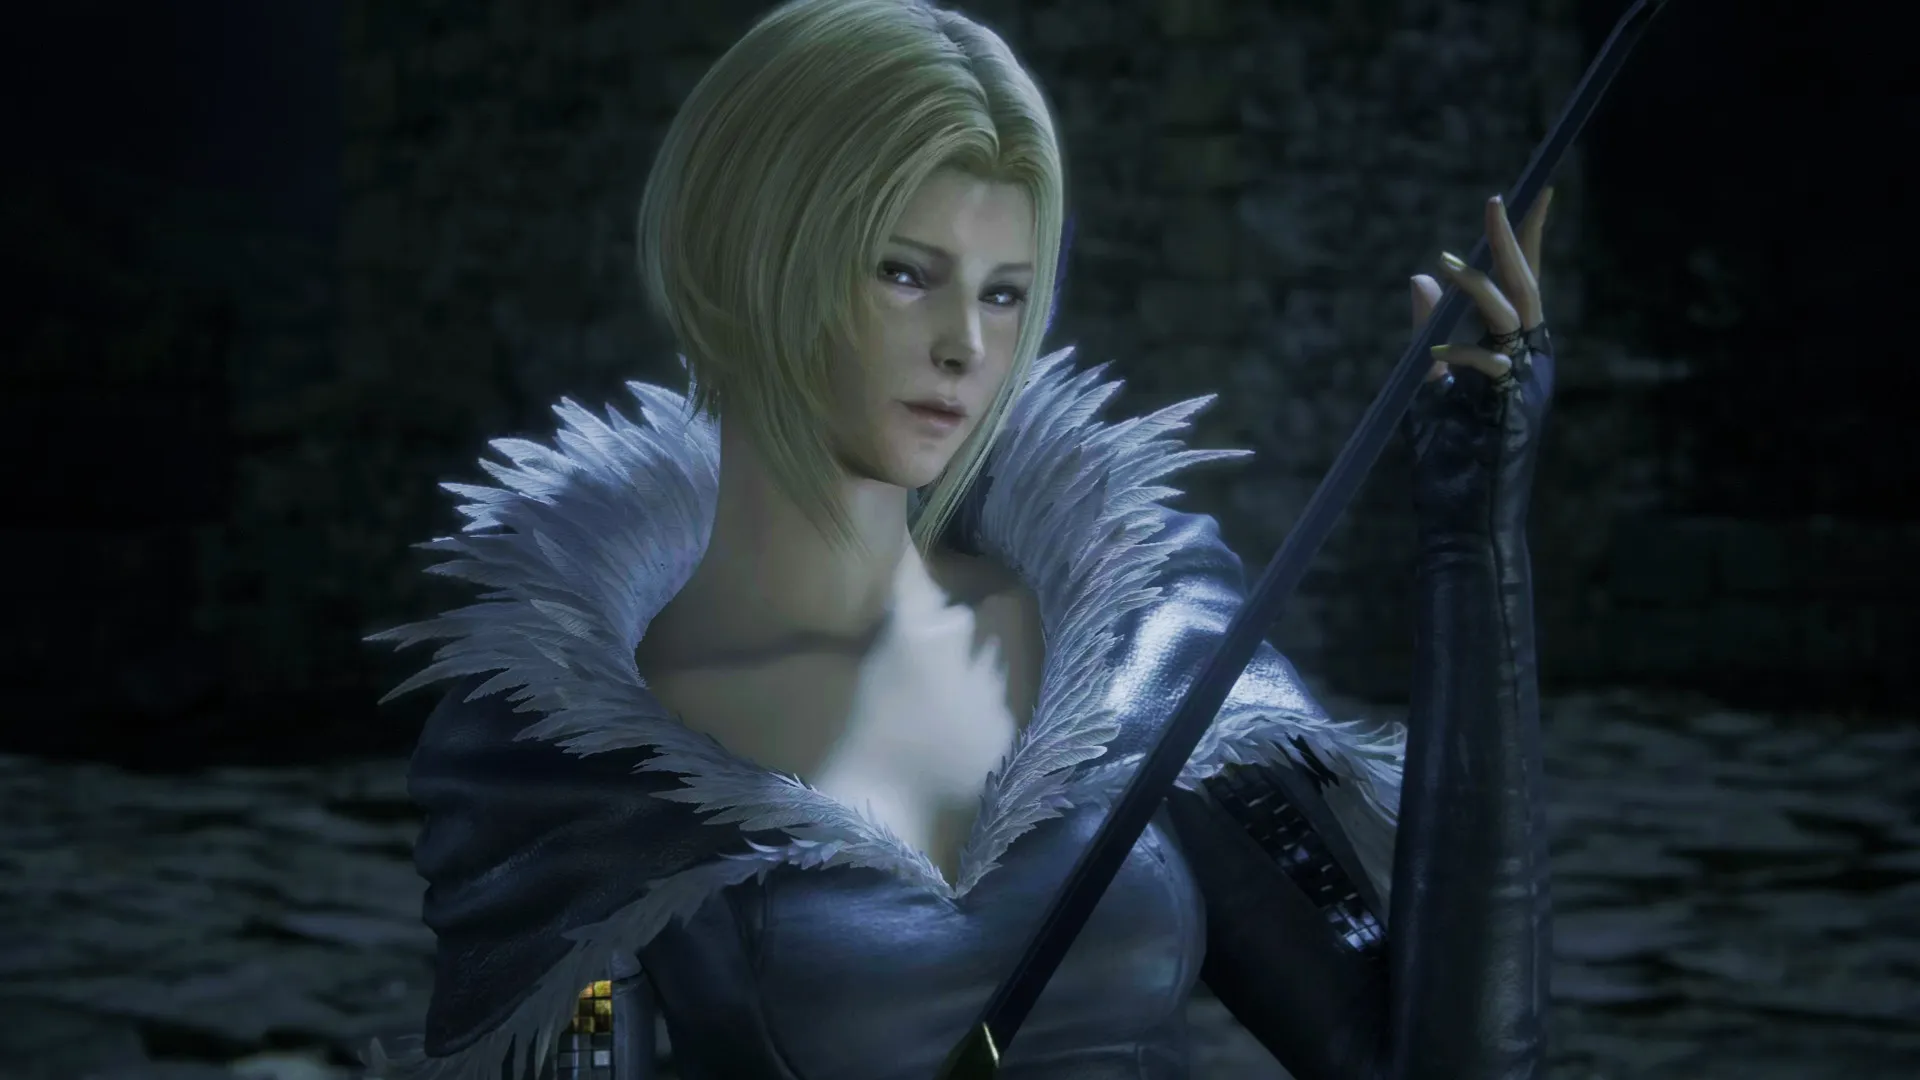 Here is everything you need to know about how to beat the Benedikta boss fight in Final Fantasy 16 (FF16), including her attack patterns across two phases.